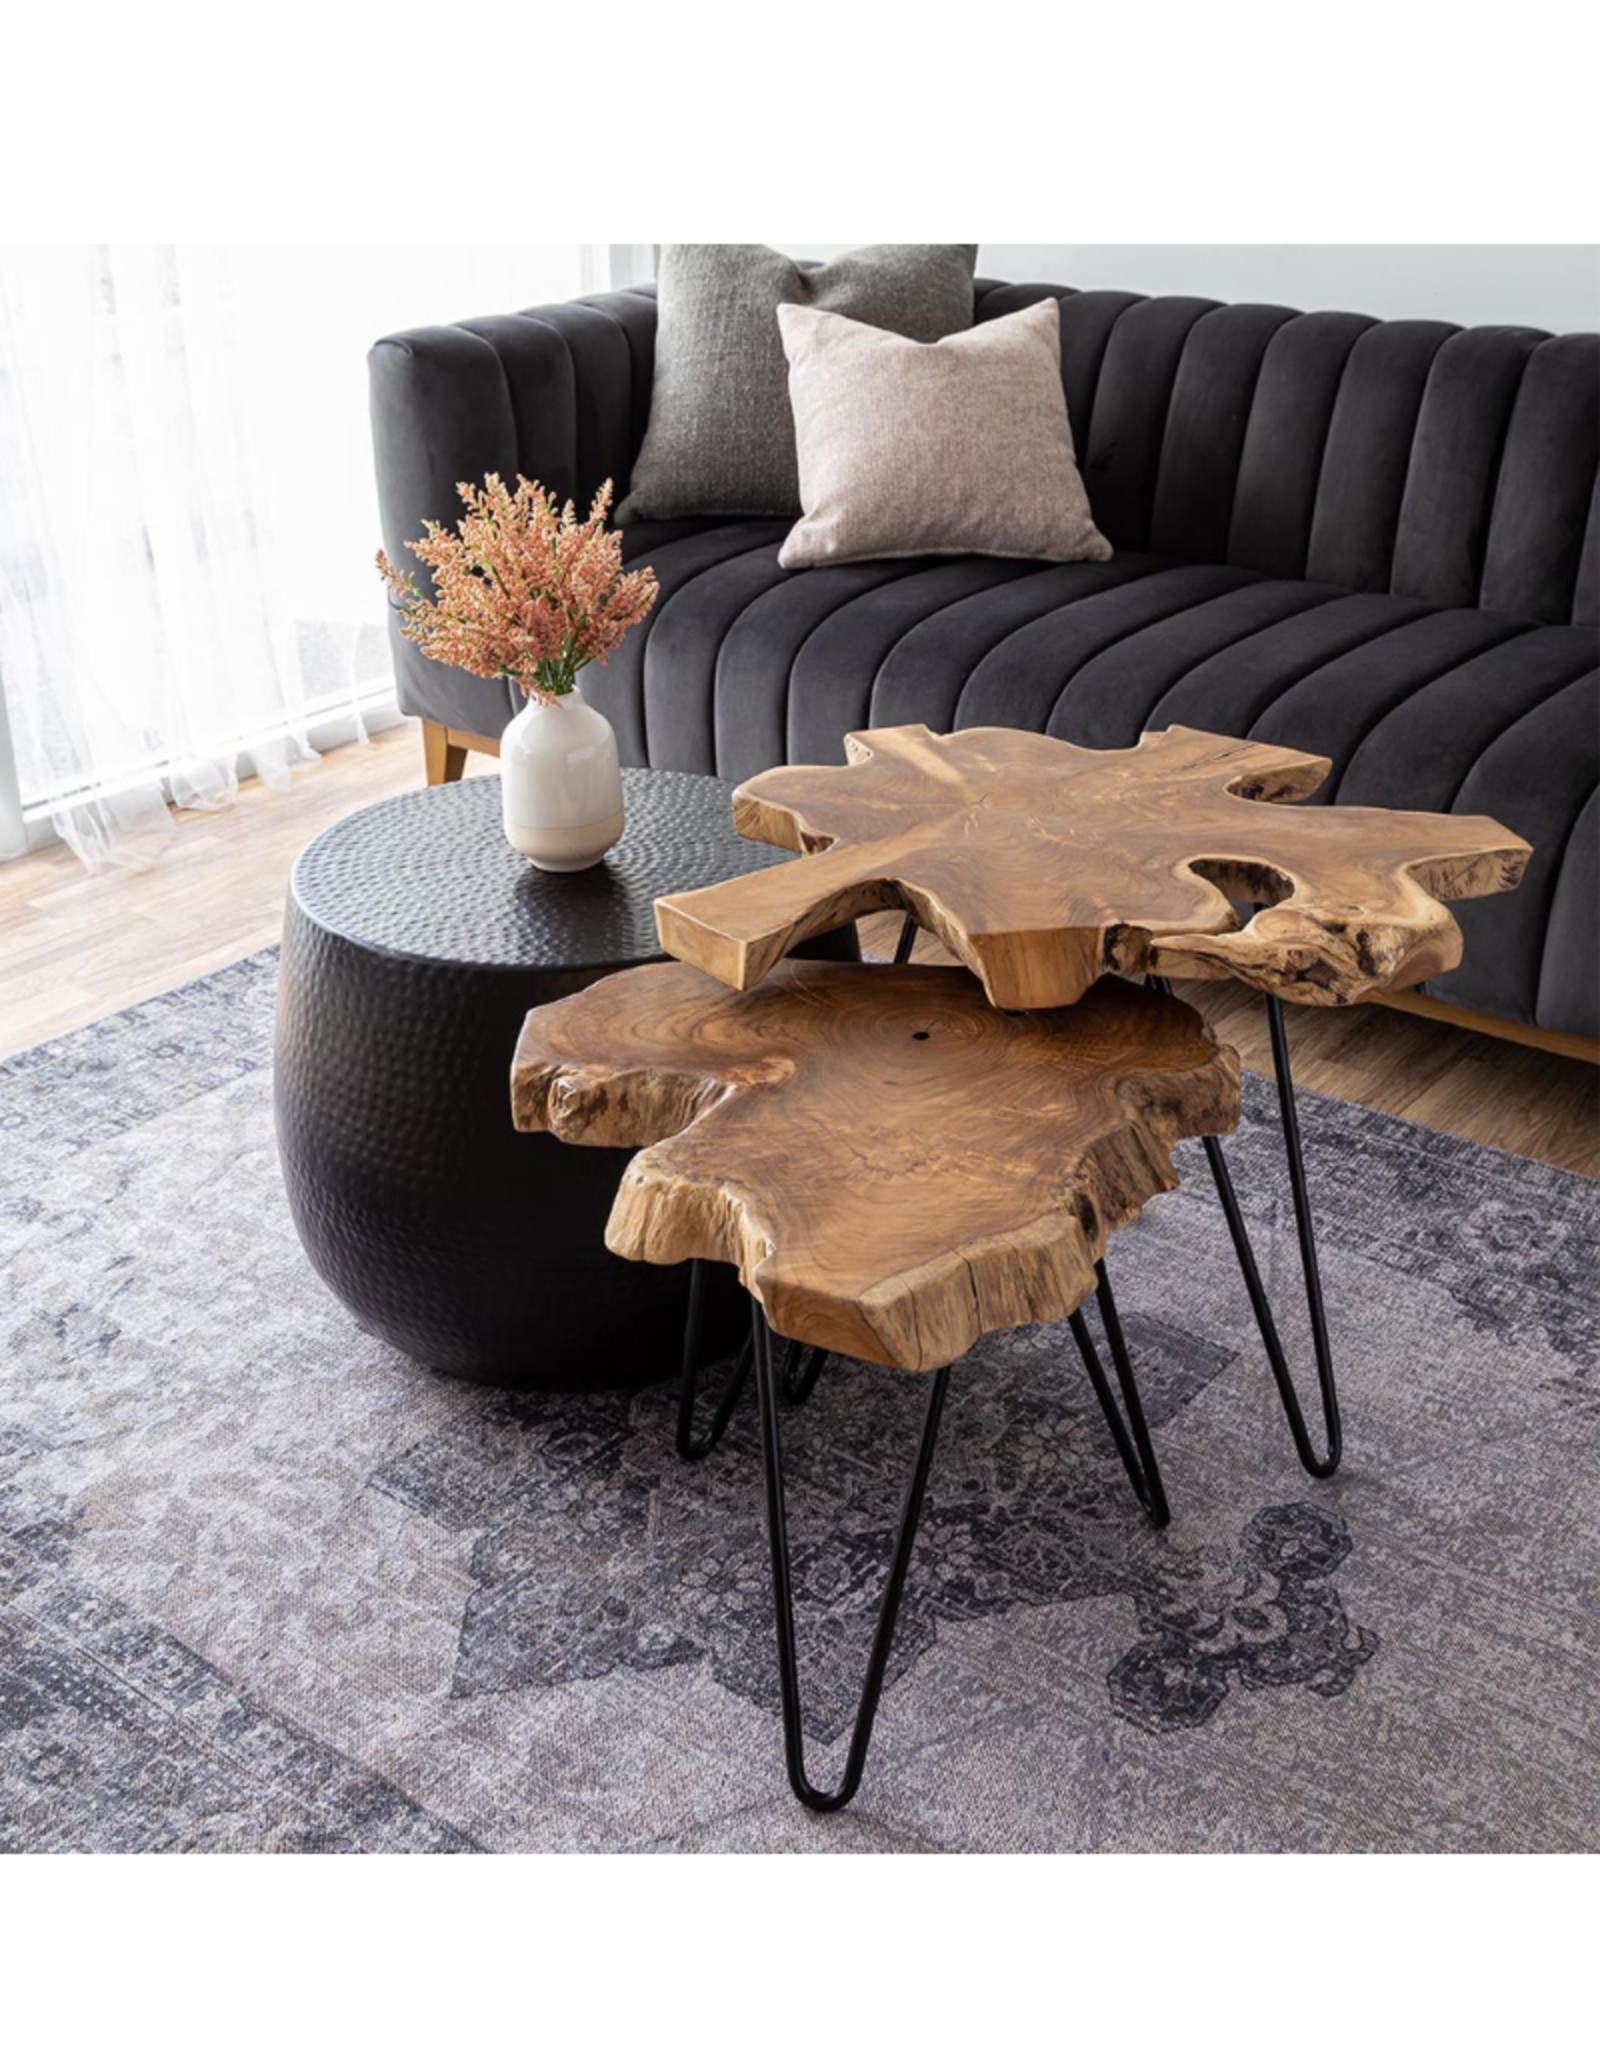 Style In Form SIF Natura Nesting Table  Small NAT-017